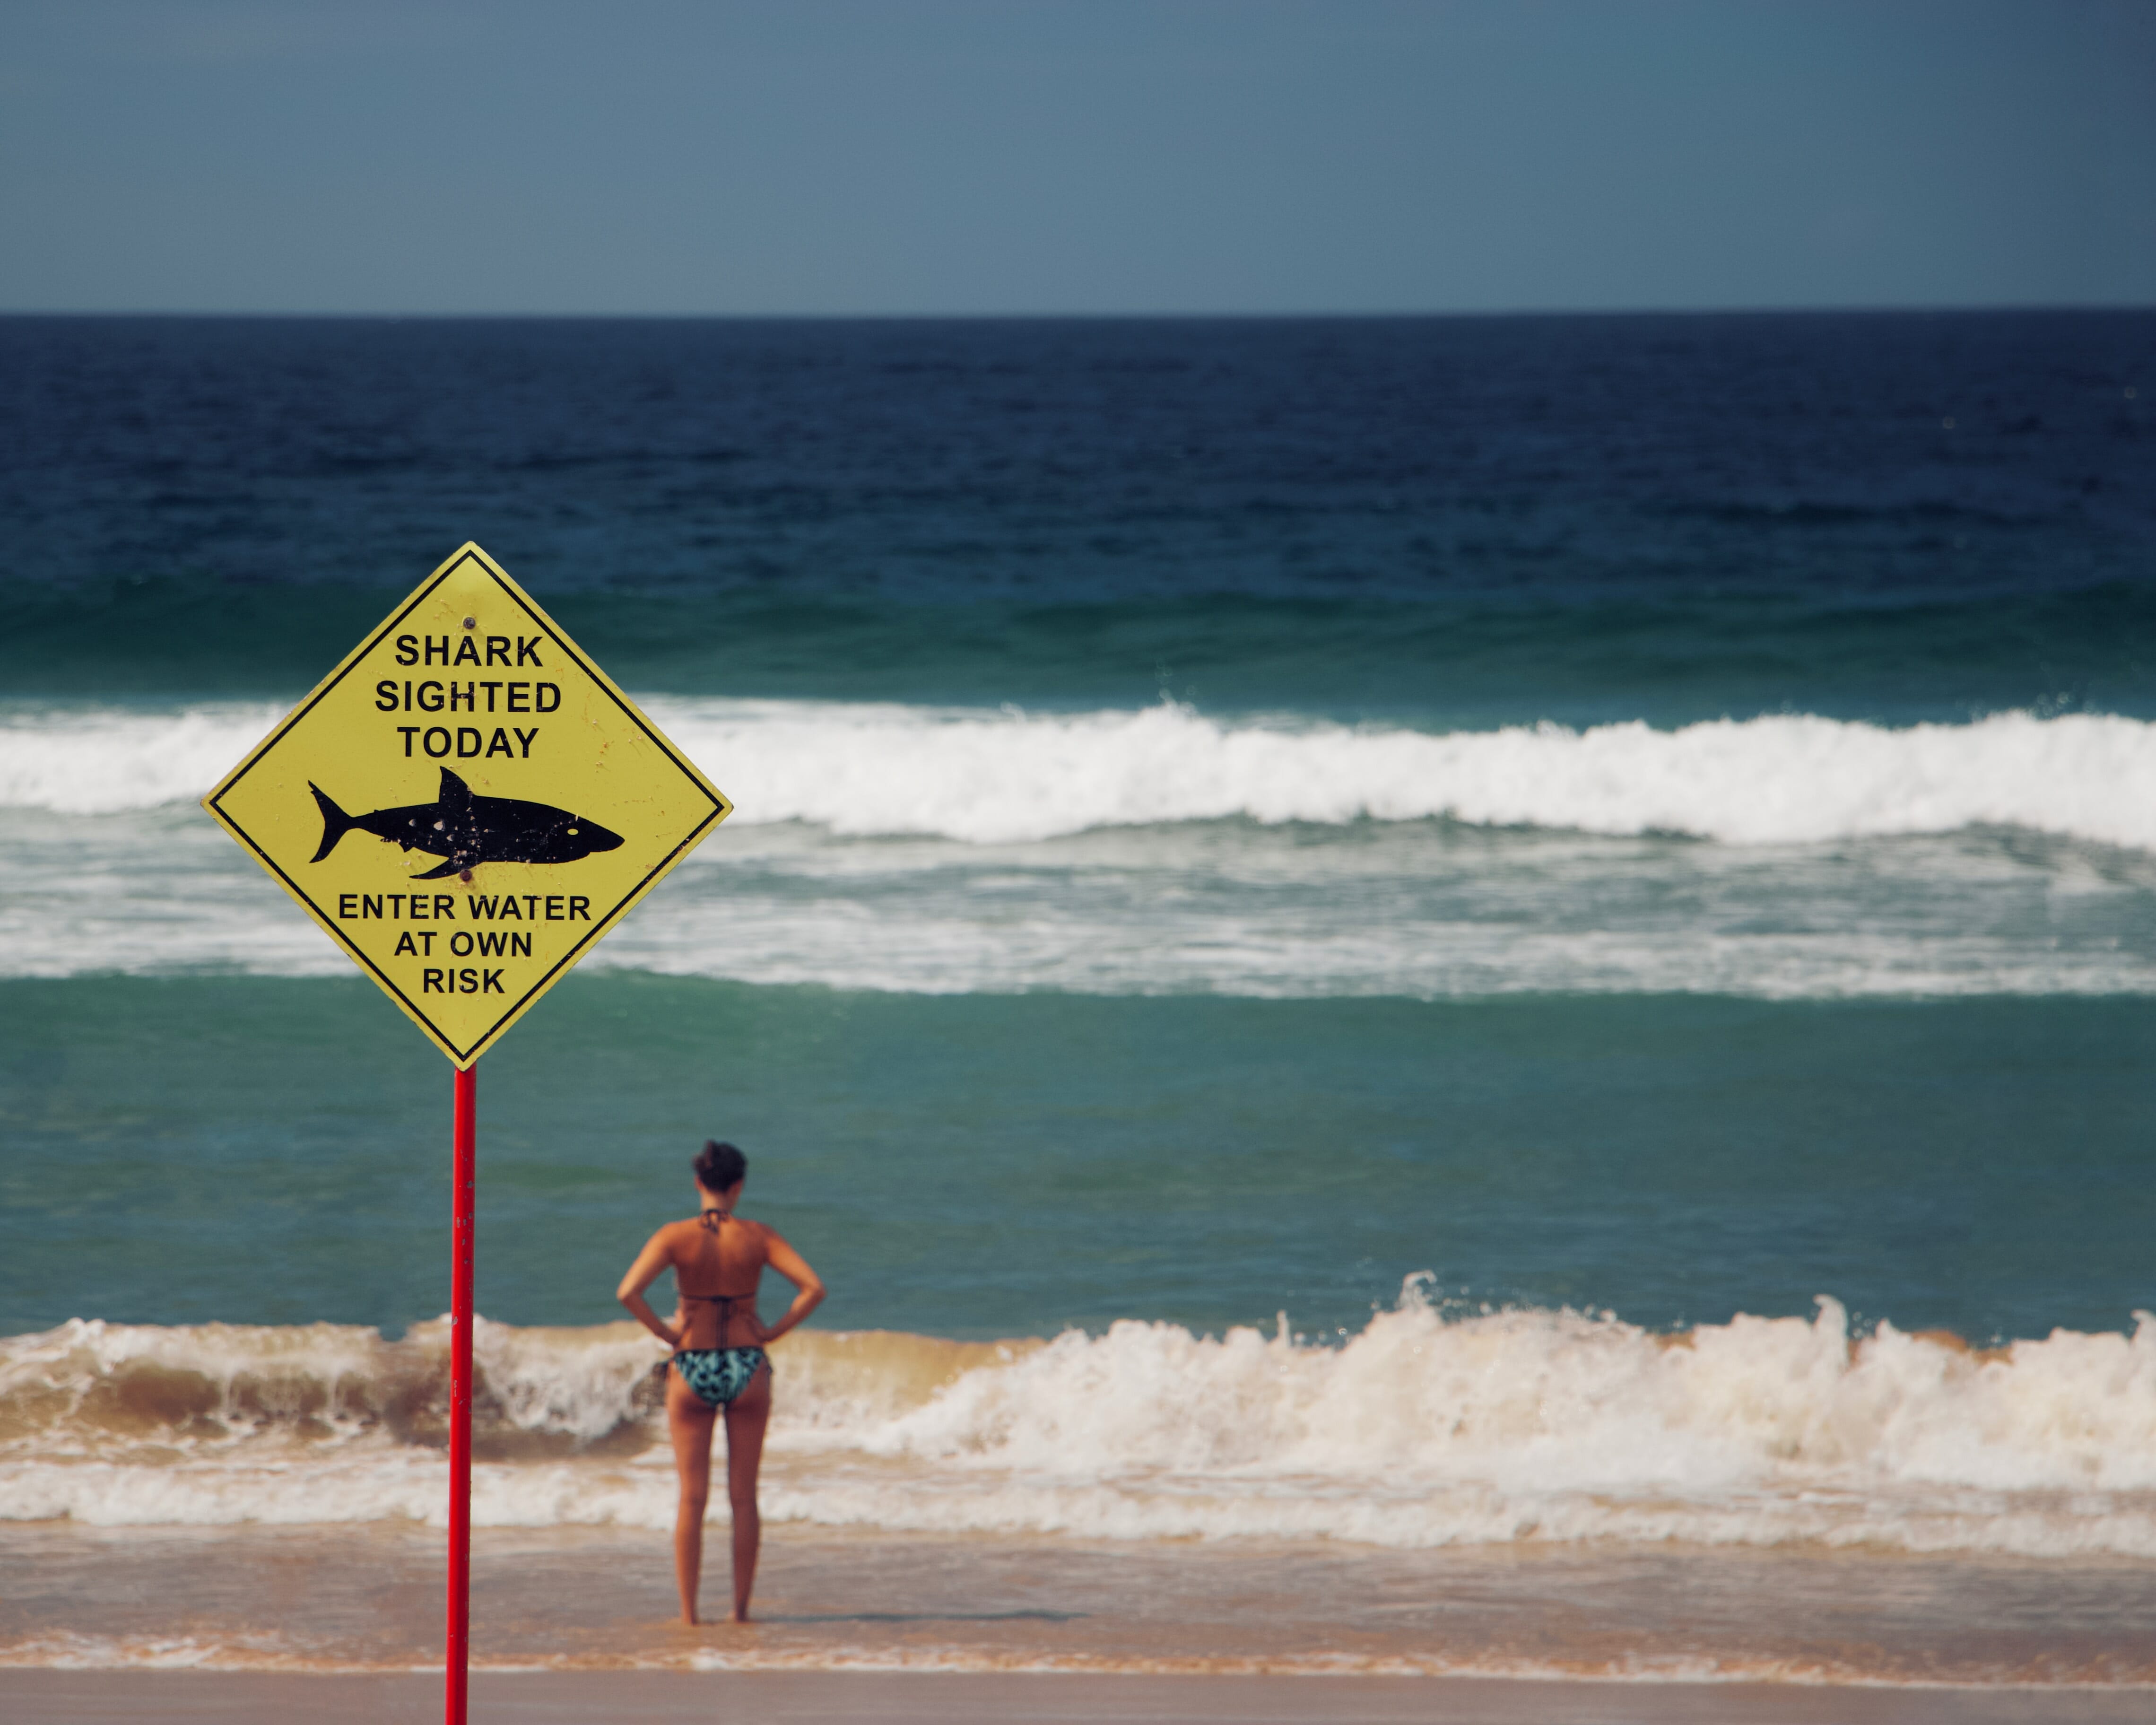 A woman in a bathing suit at the beach, standing by a warning sign about a shark sighting.